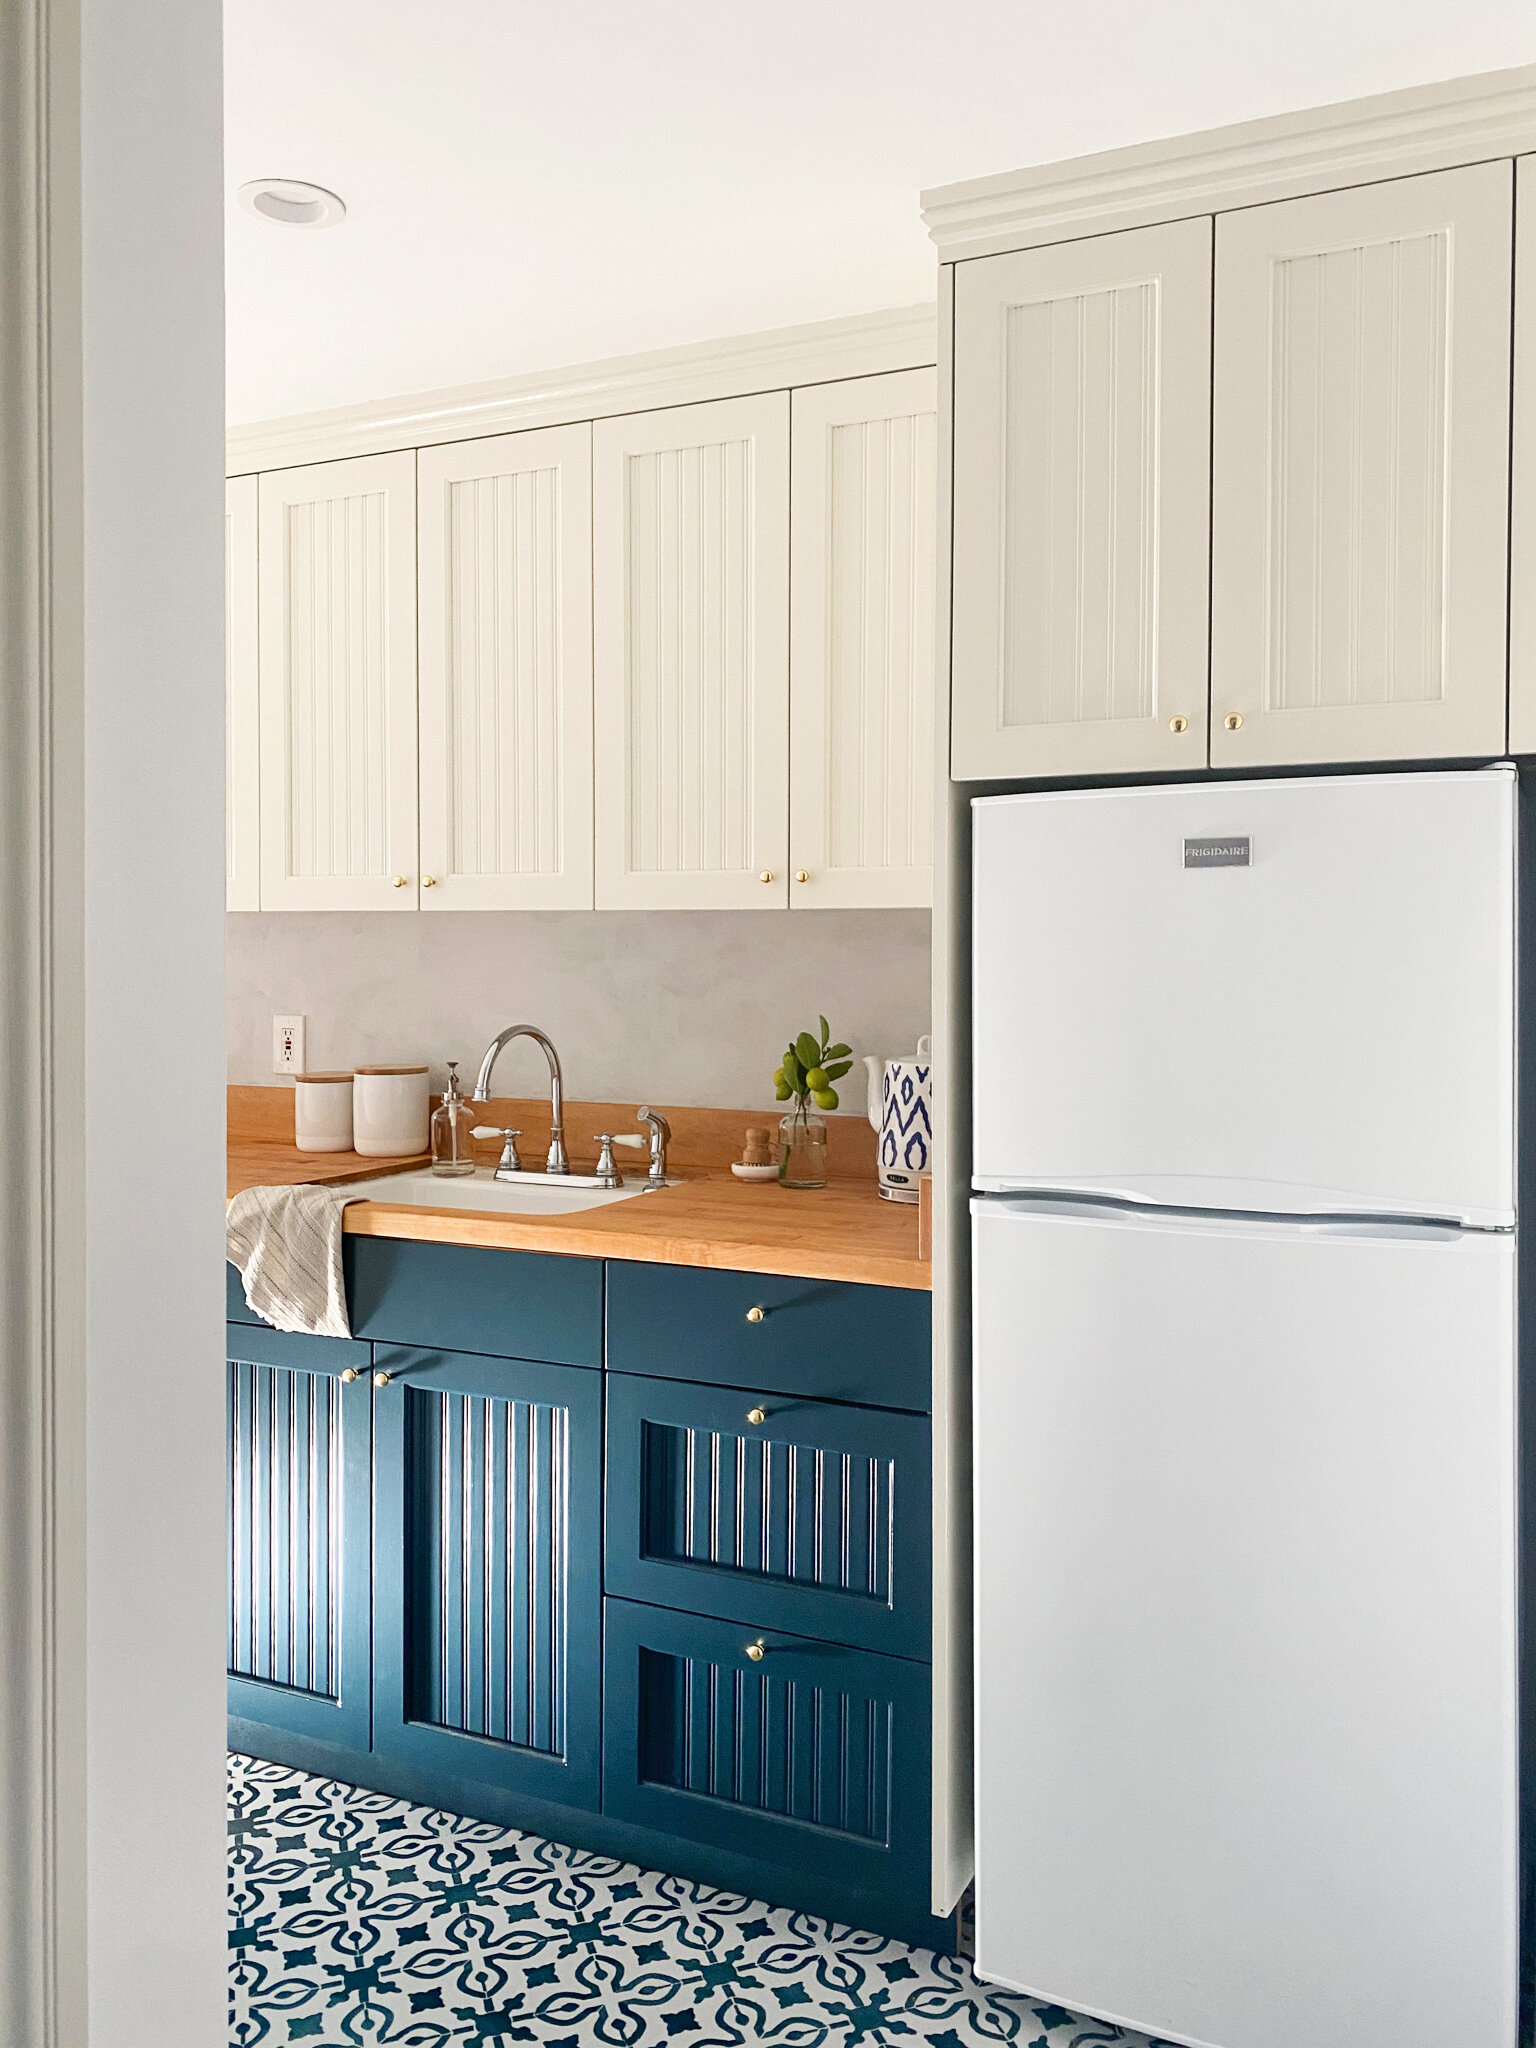  The fridge blends in with the white upper cabinets and sidewall painted to match. 